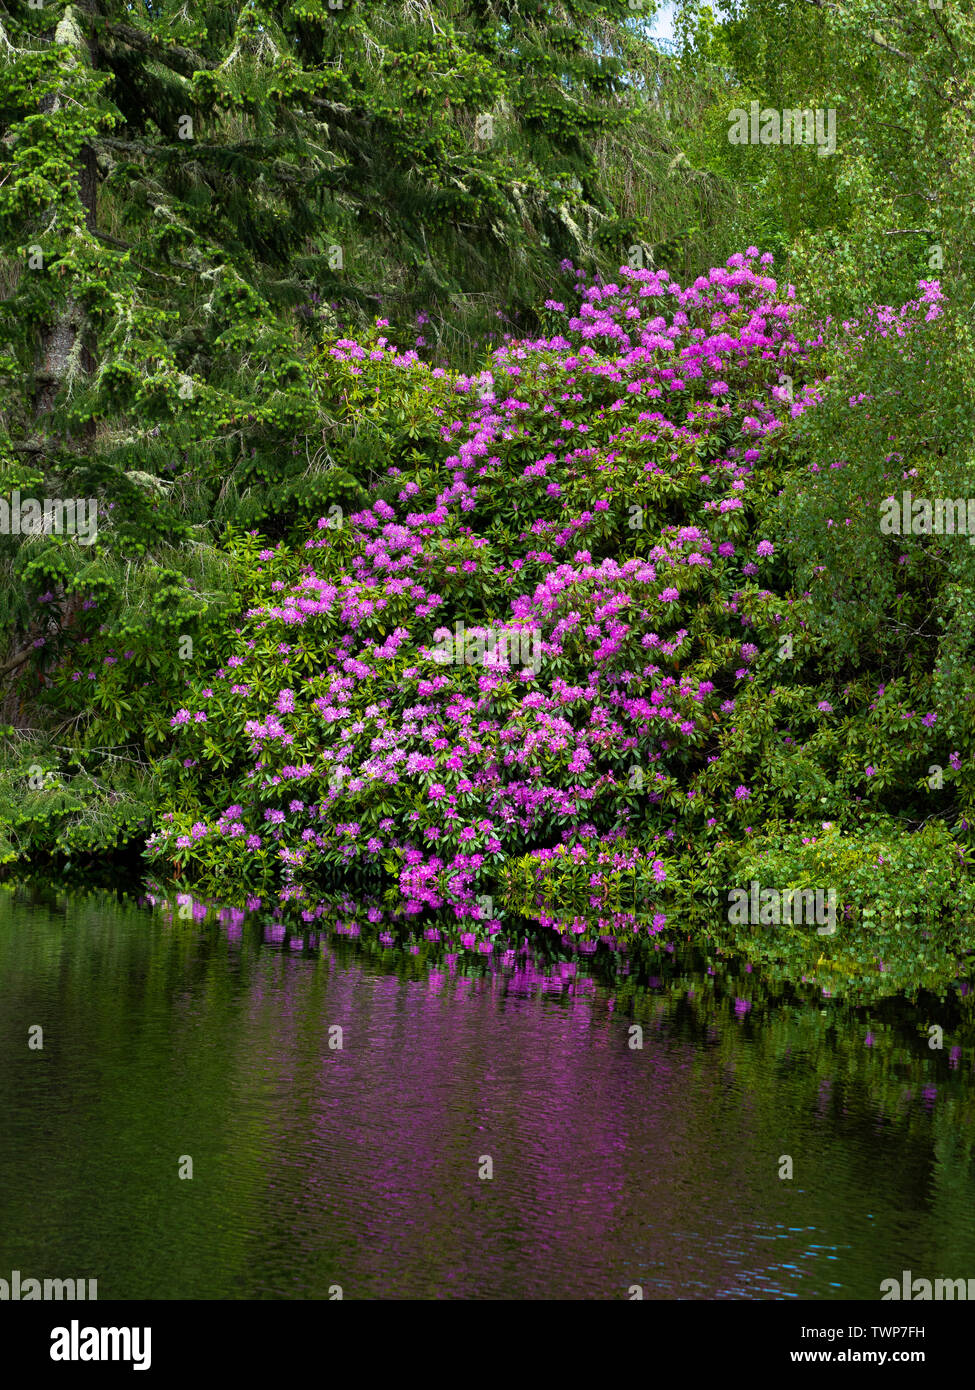 Rhododendrons on the side of a loch Stock Photo